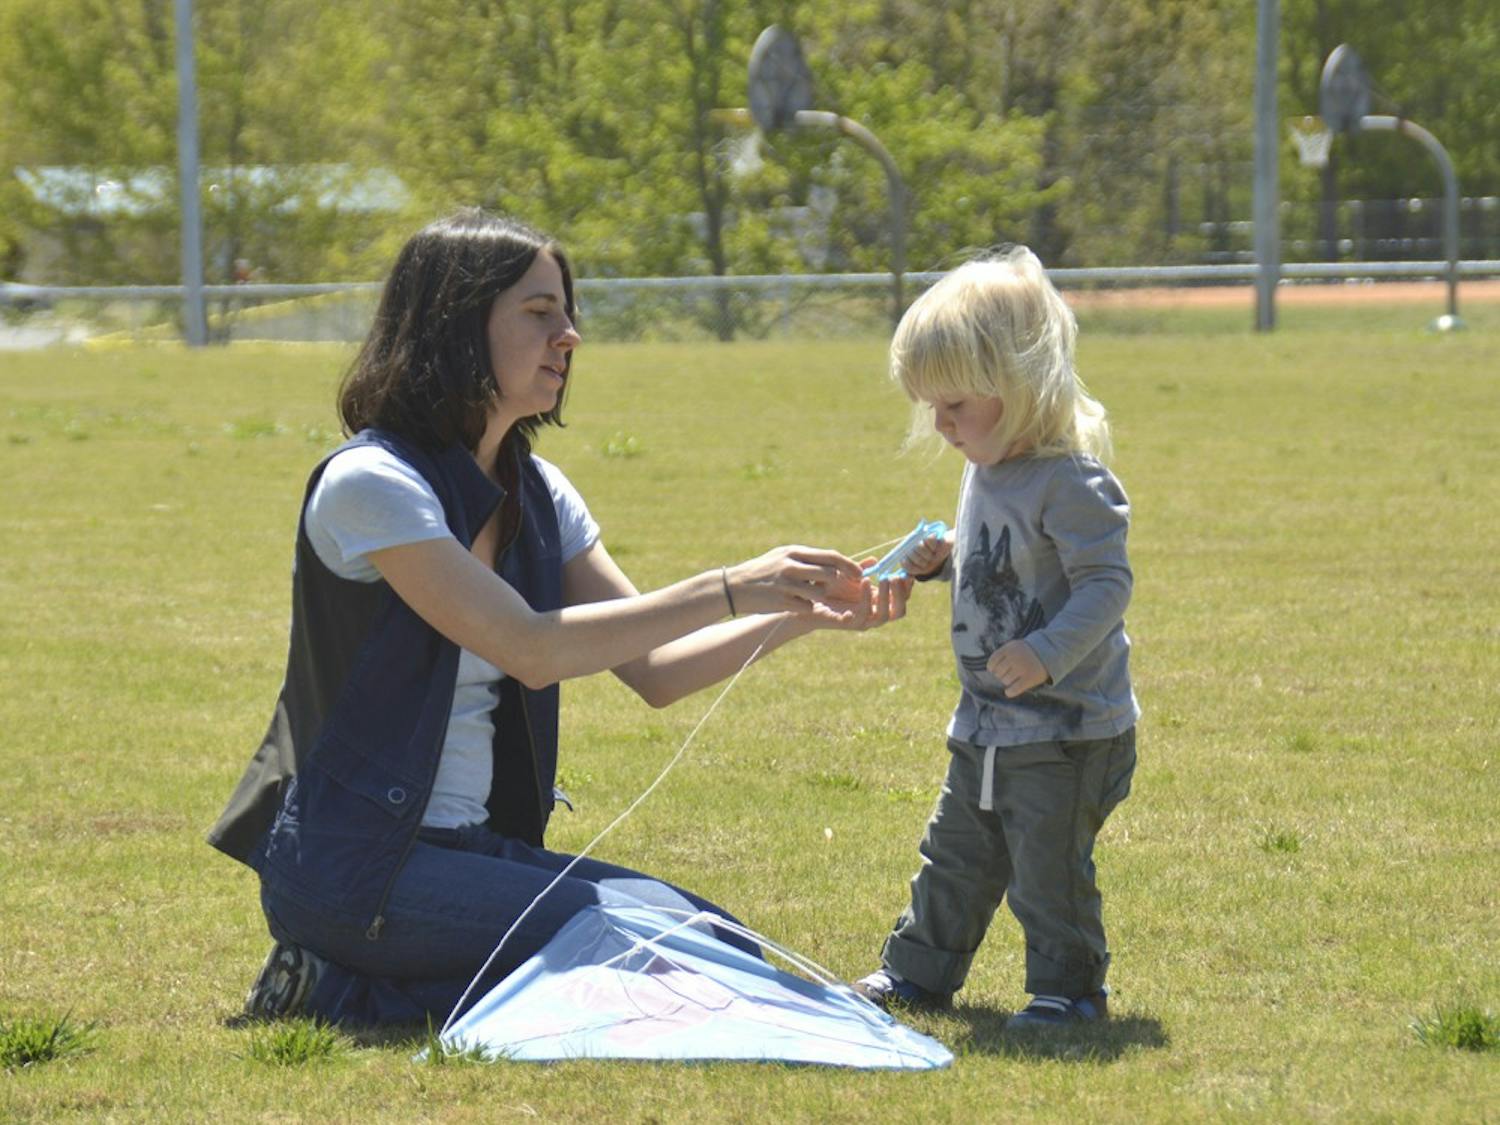 Carrboro Kite Fly takes place on Sunday Apr.17  from 1PM to 3 PM at Hank Anderson Park. Andrea Wood (left) from Carrboro is teaching her two-year-old son Rye Jones(right) to fly a kite. 